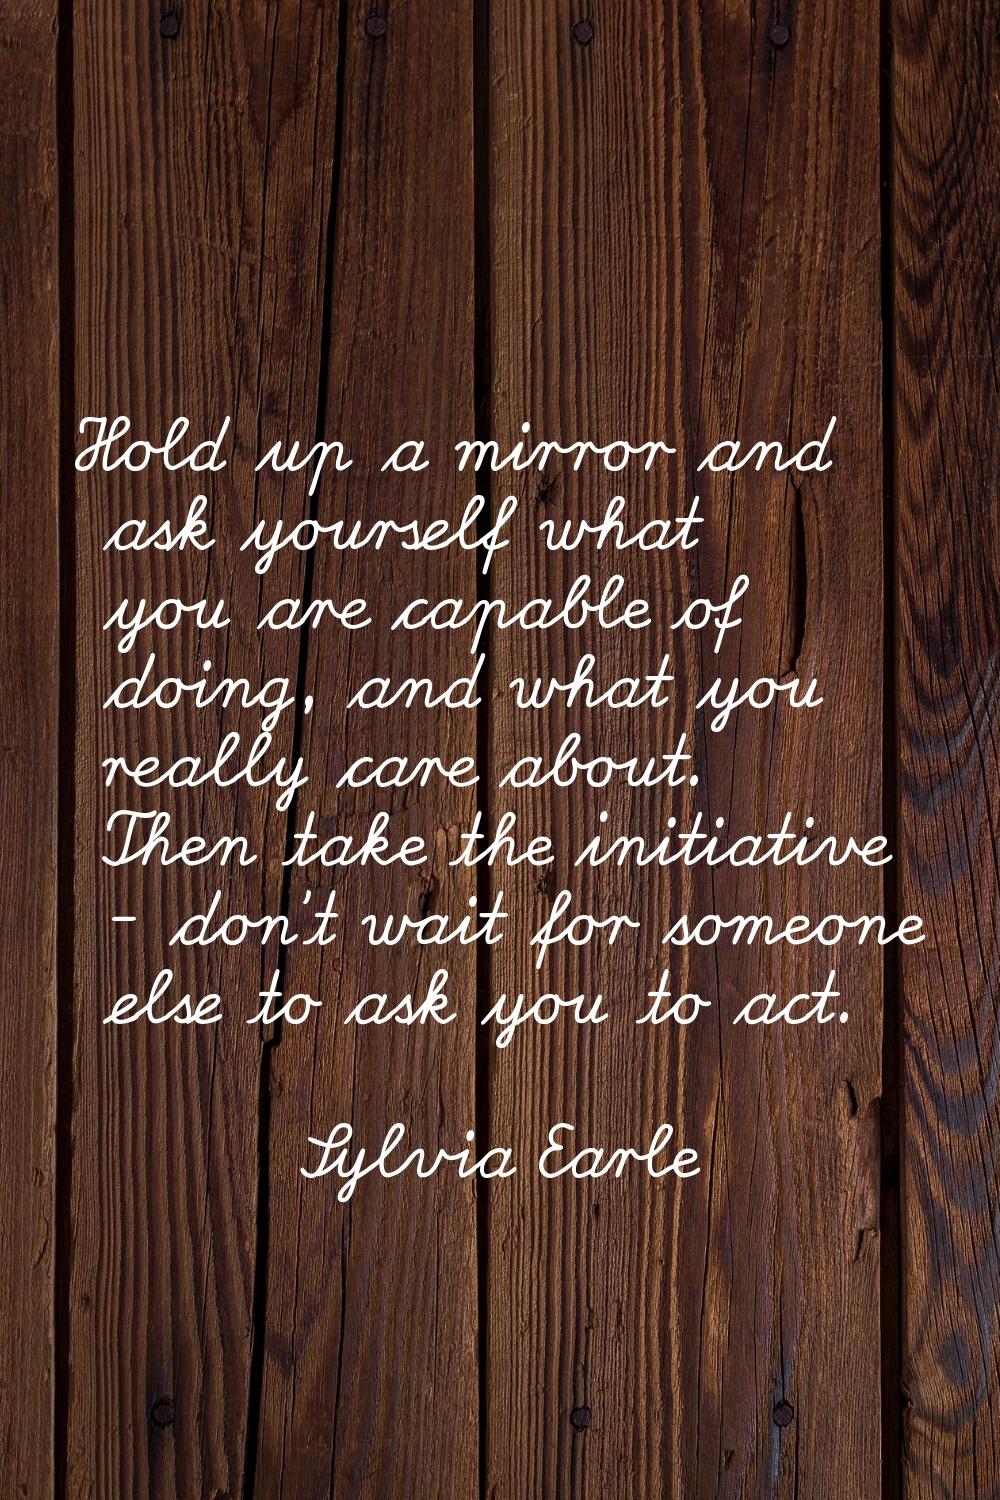 Hold up a mirror and ask yourself what you are capable of doing, and what you really care about. Th